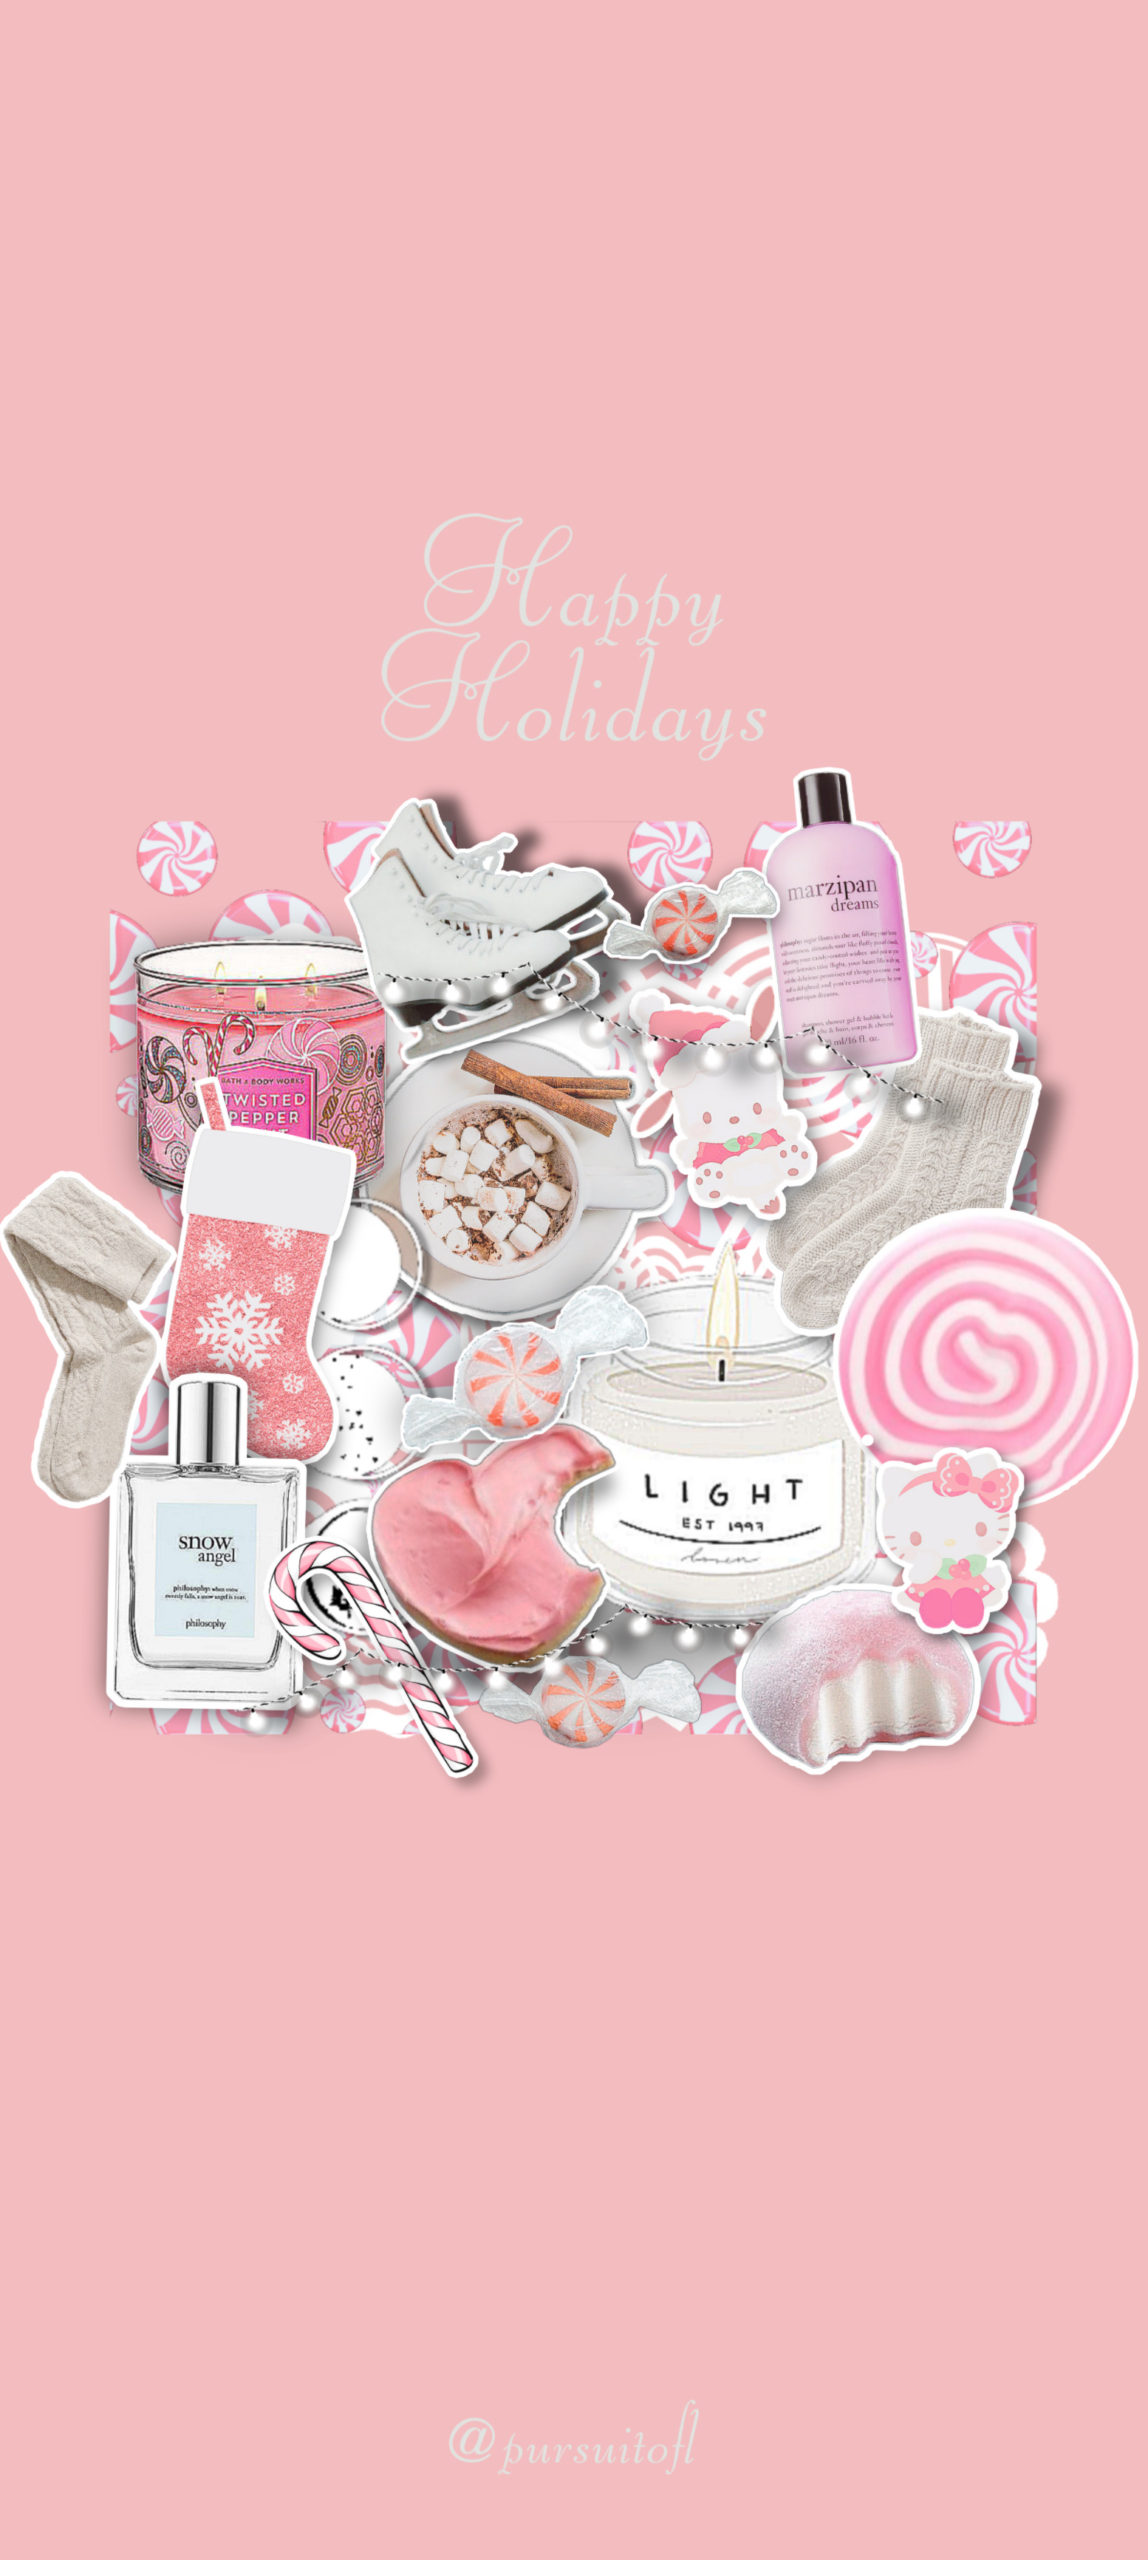 Pink Holiday Phone Wallpaper with Happy Holidays text and collage of pink and white winter items